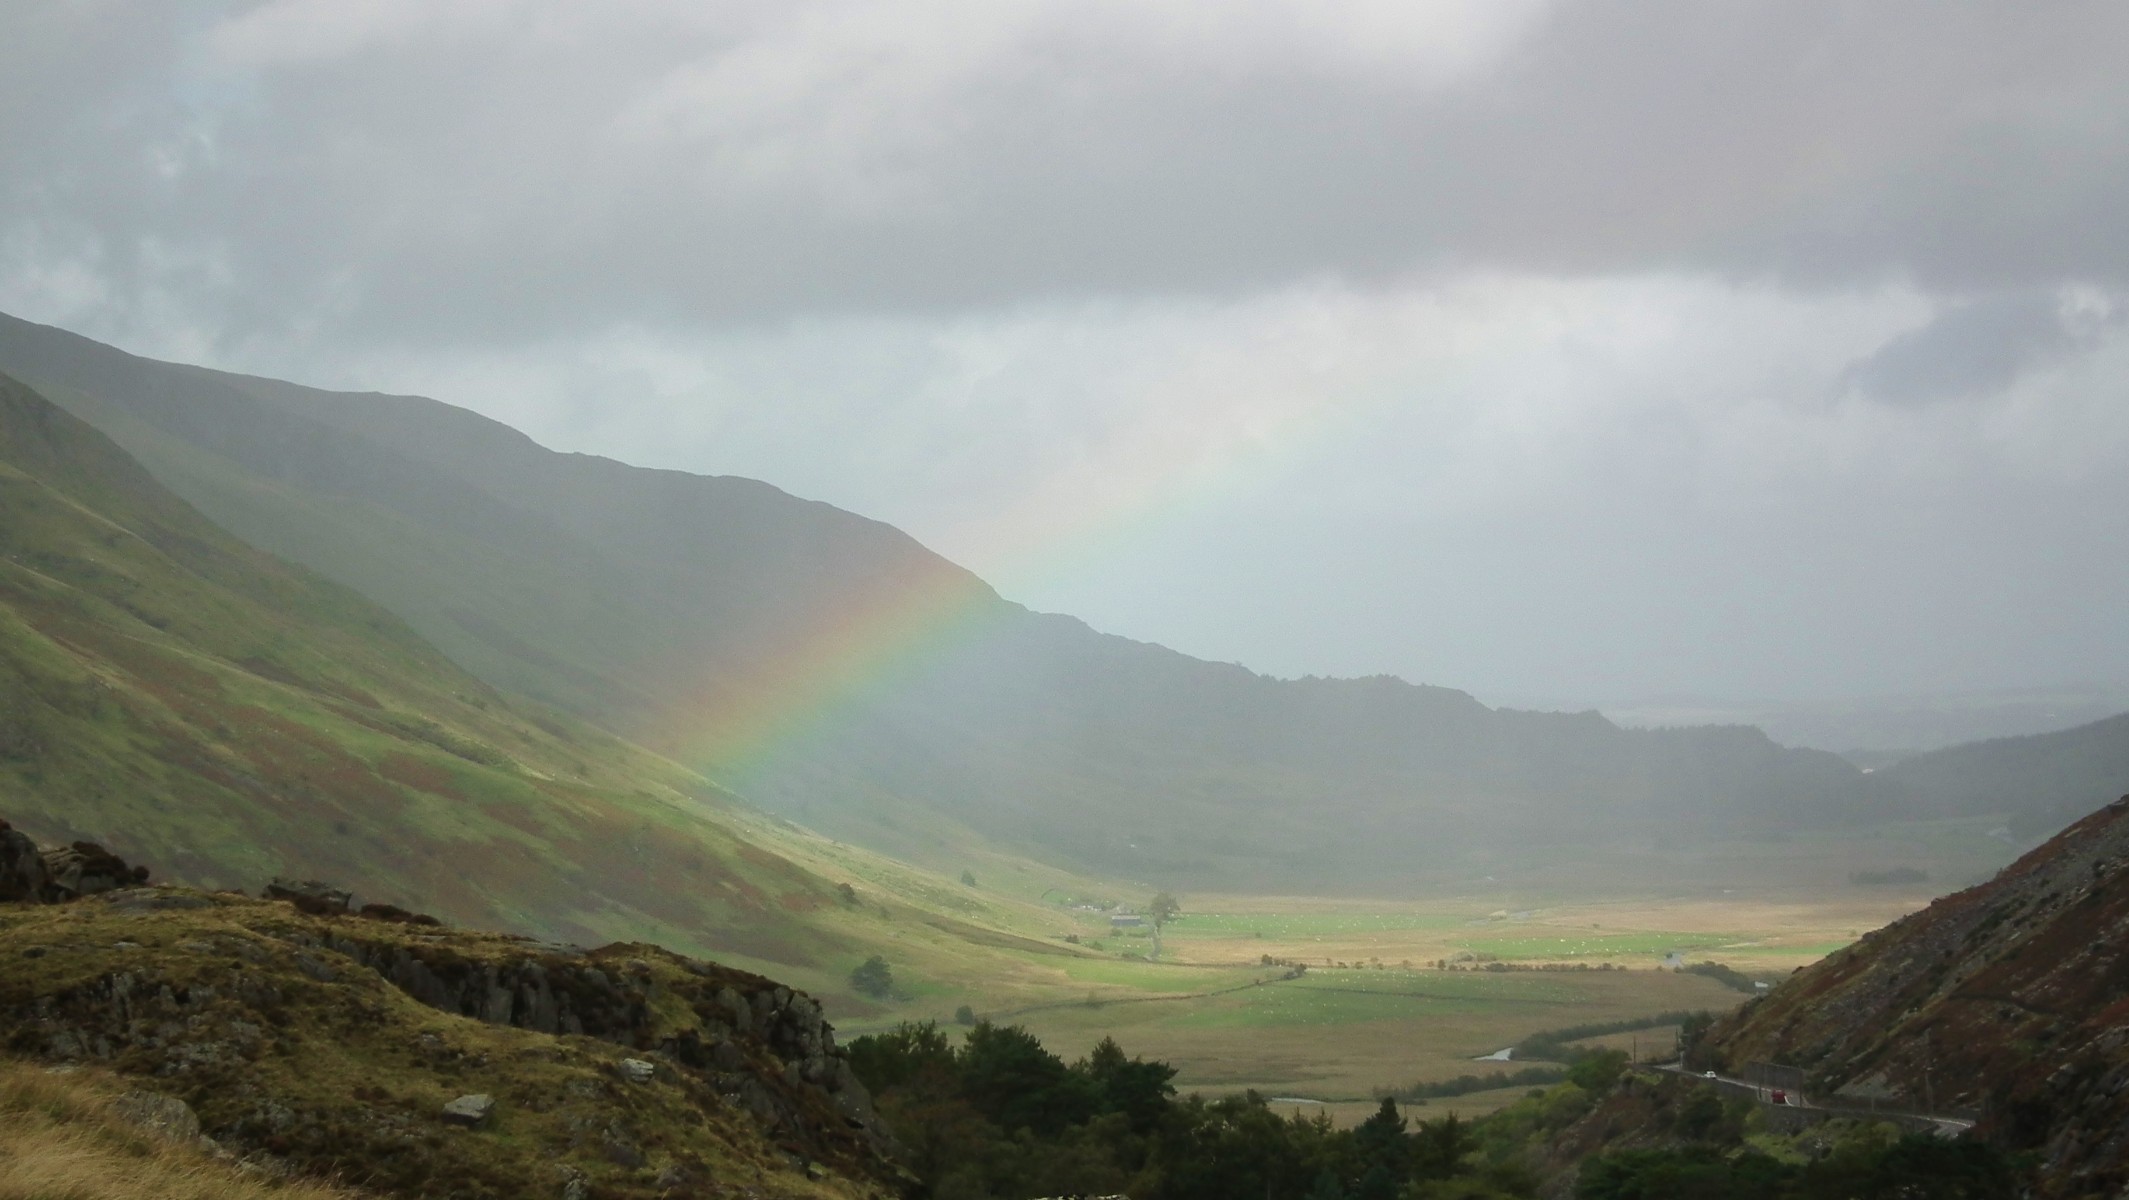 After the storm, Scenery | Mountain | Sky | Rain | Rainbow | Green | Valley | View | Wales | Water | Travel